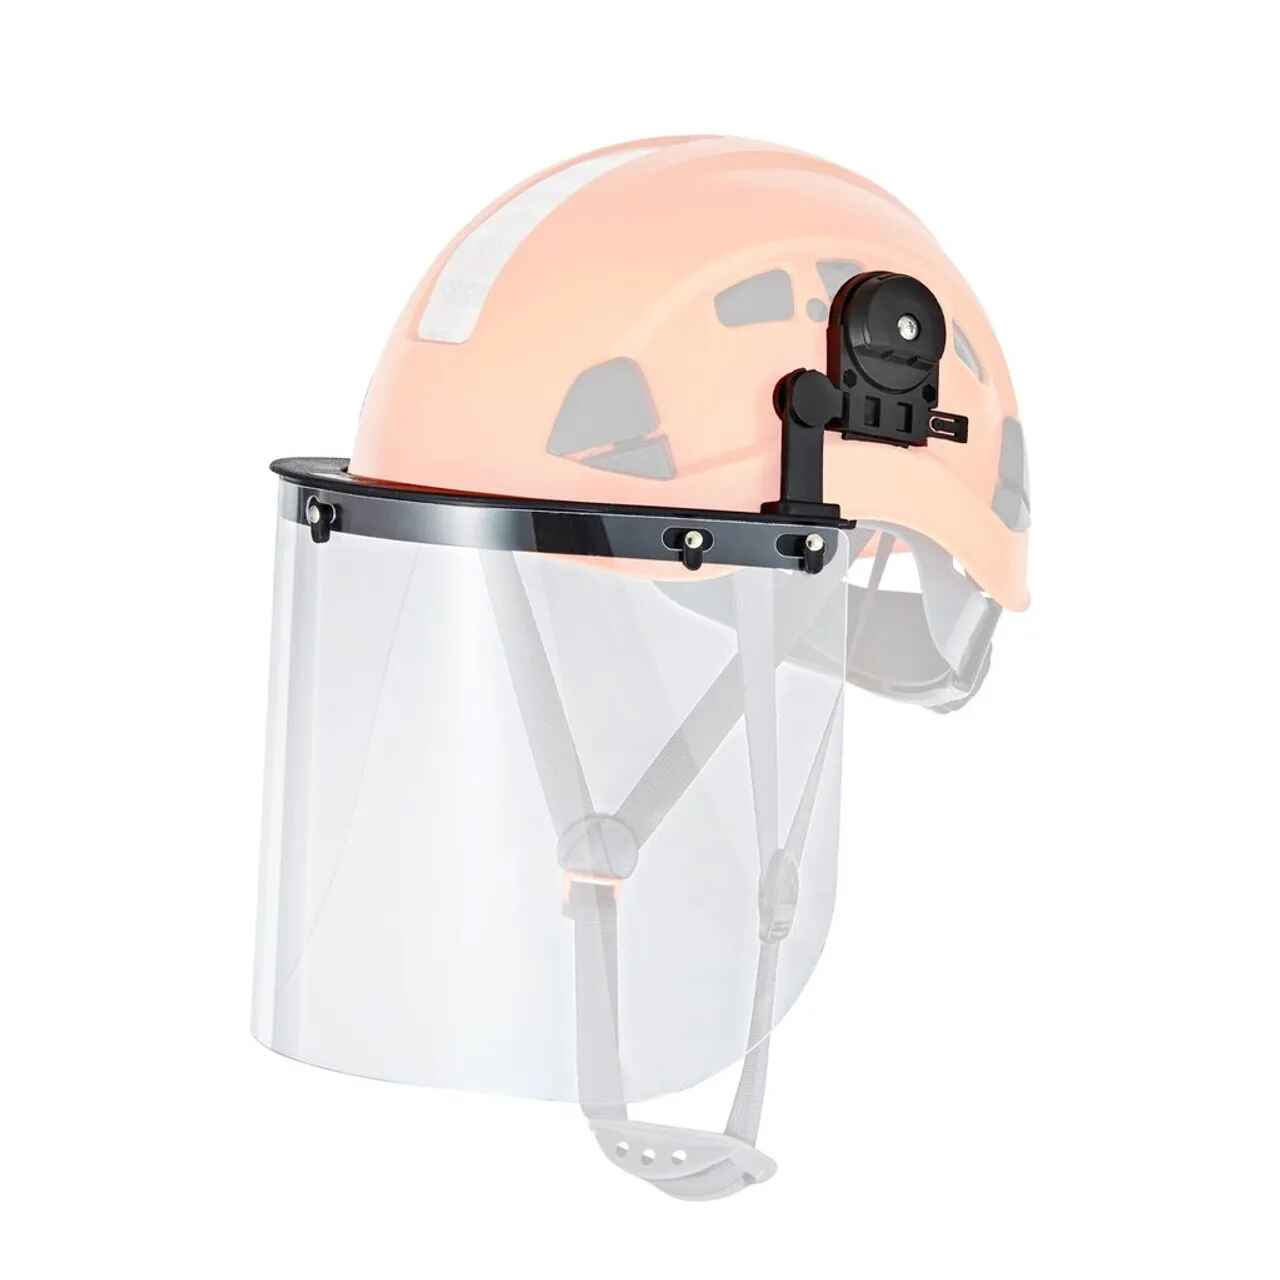 Z87 Face Shield and Mounting Bracket for Safety Helmets (H1 Series)